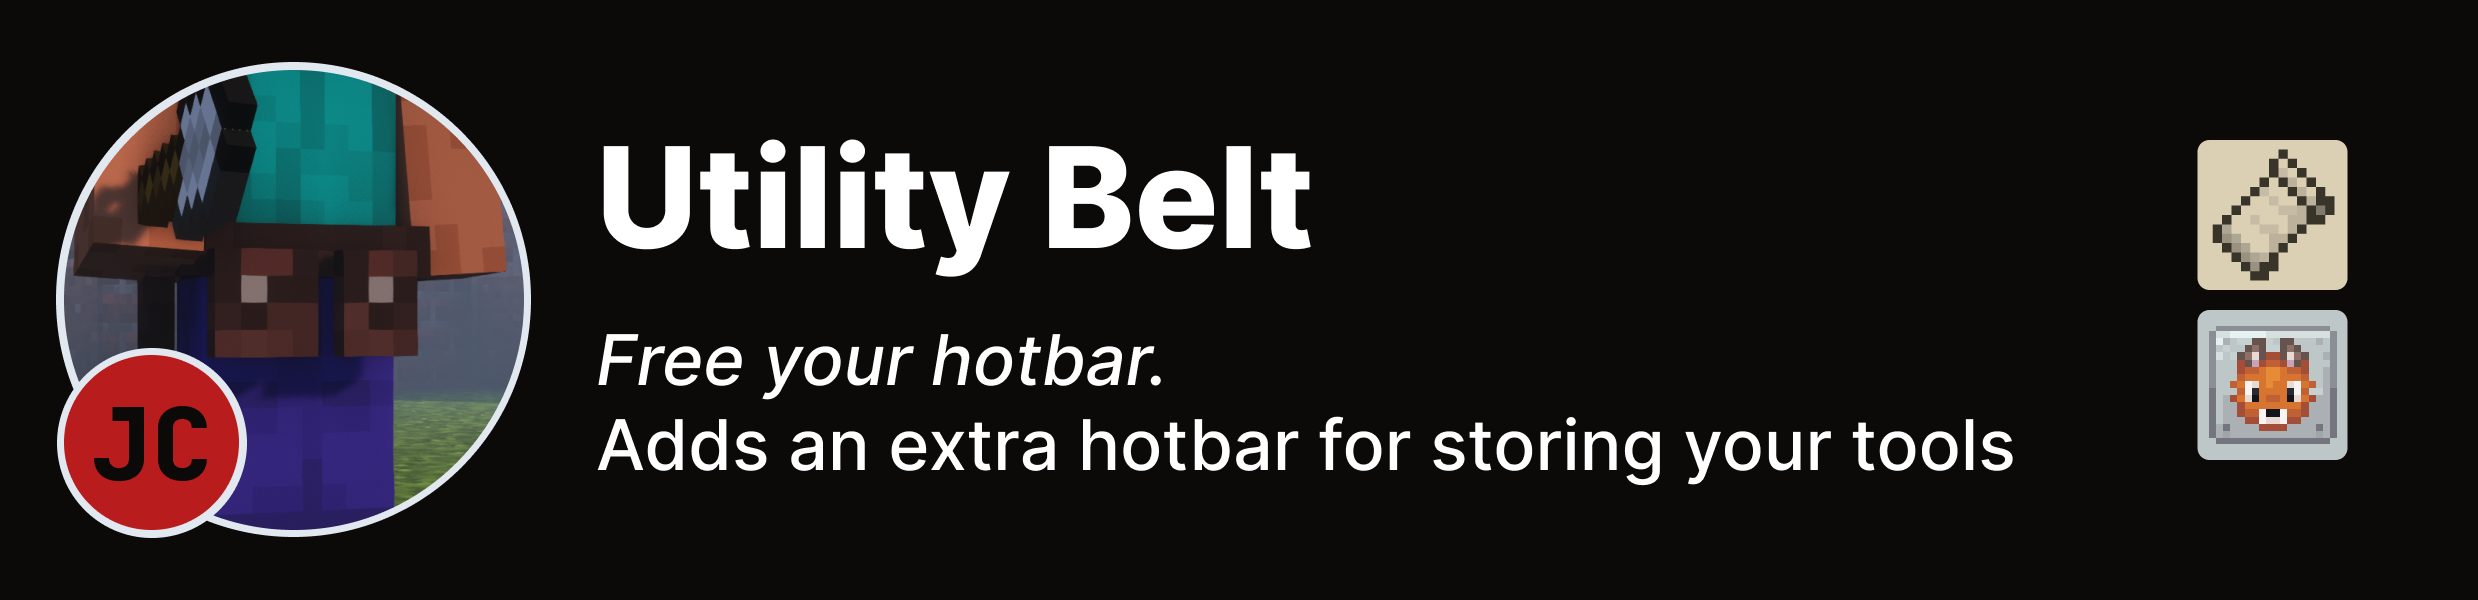 Utility Belt: Free your hotbar; adds an extra hotbar for storing your tools